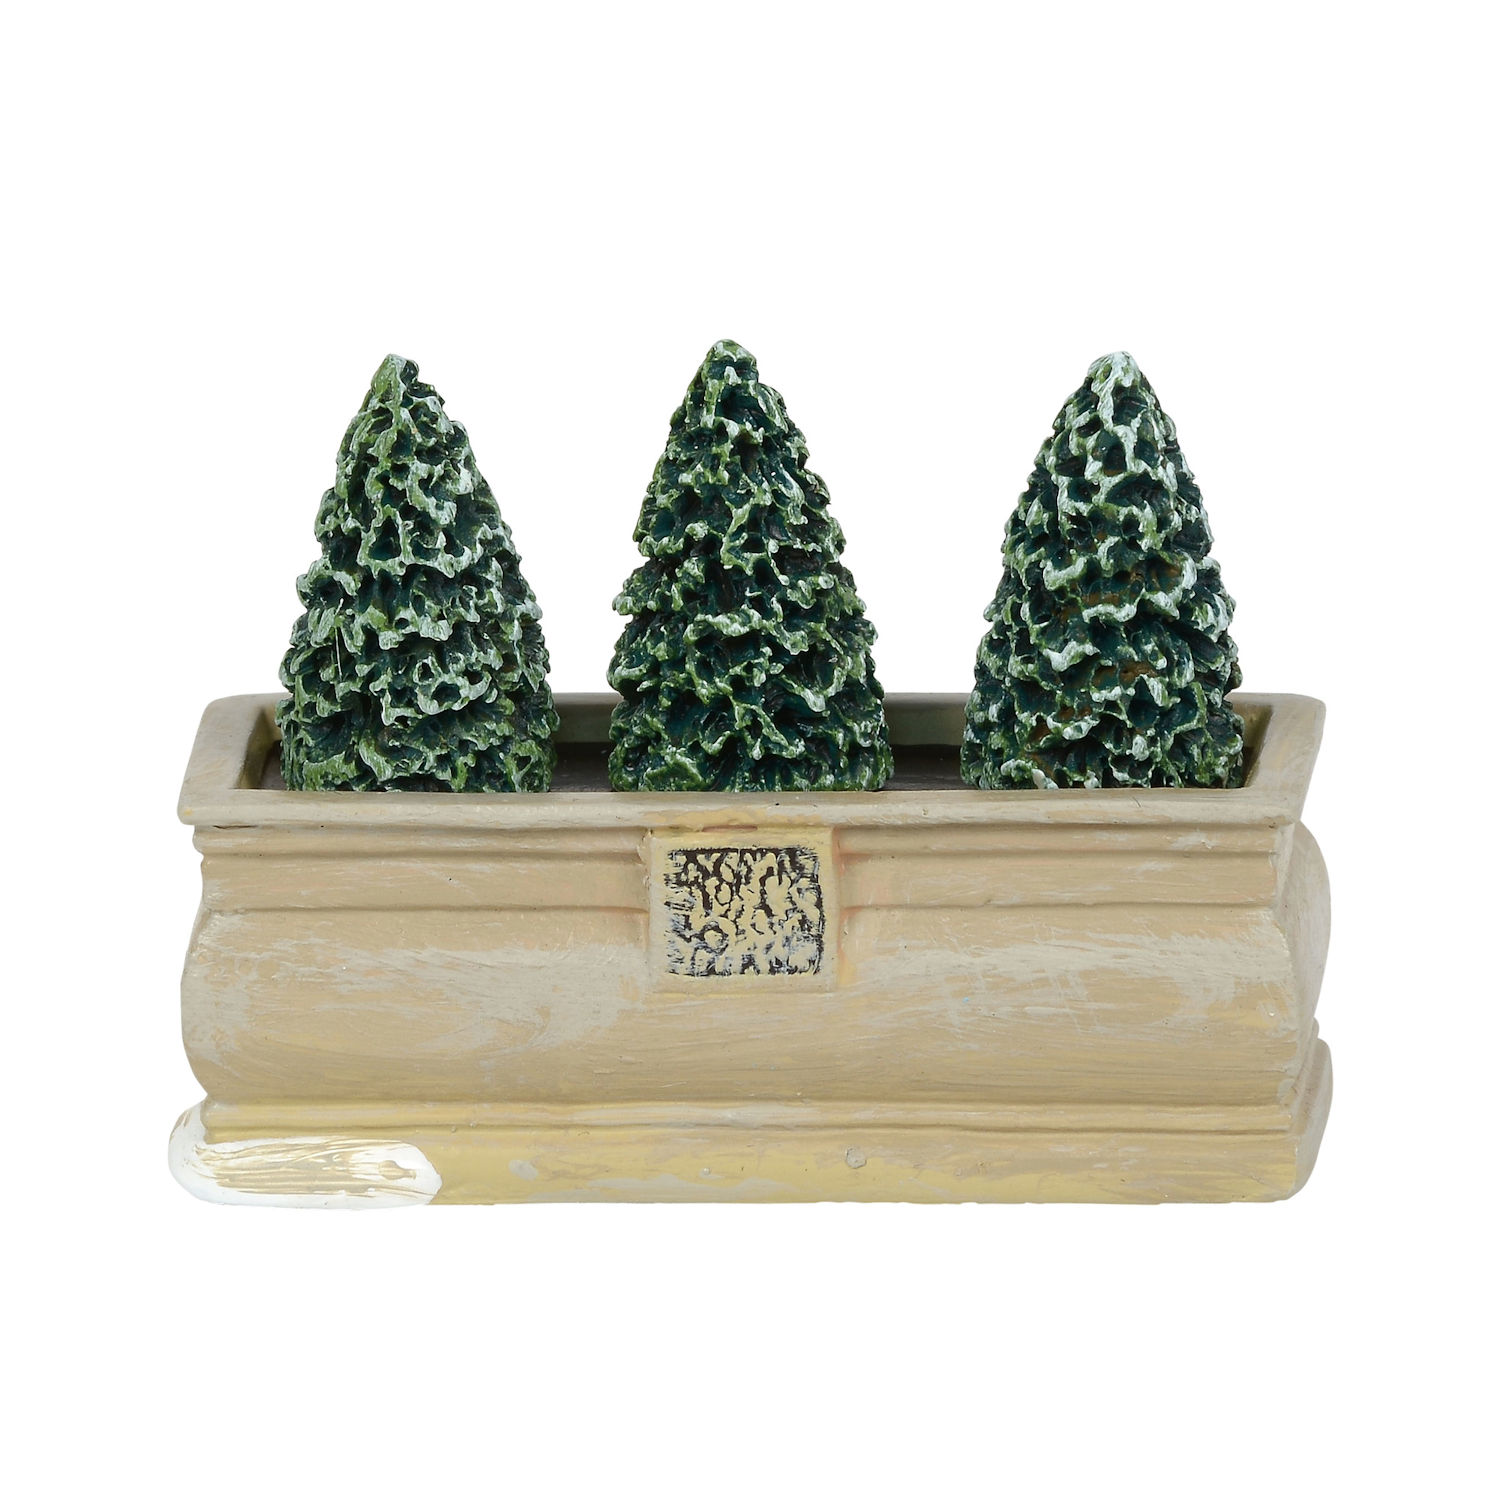 Department 56 Cross Village Product Classic Christmas Topiary